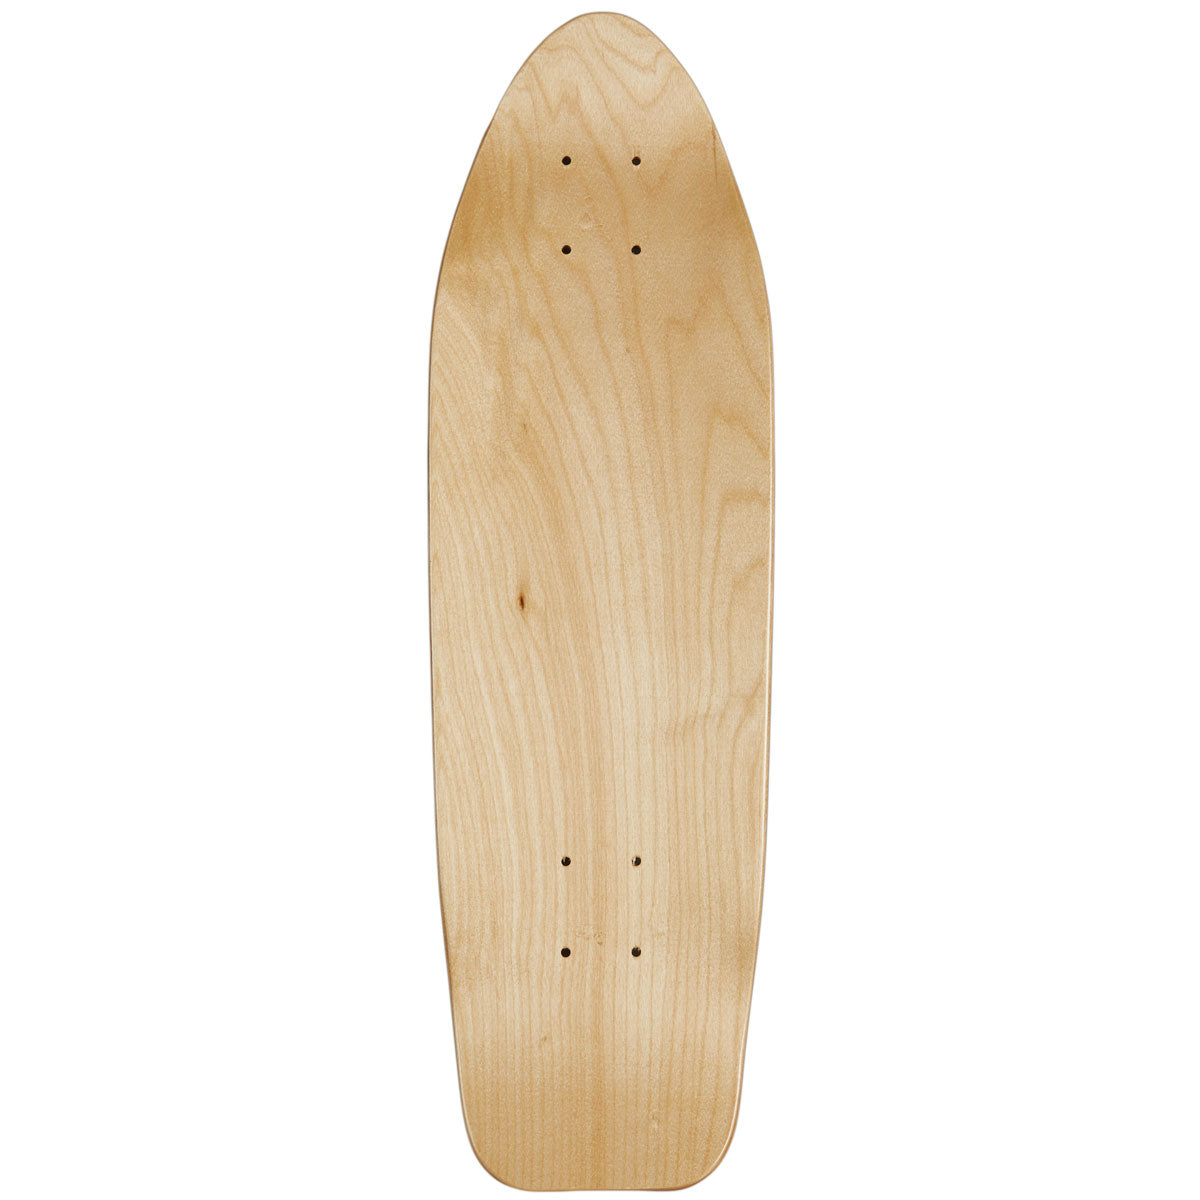 Rout Pinstripe Cruiser Skateboard Complete image 2